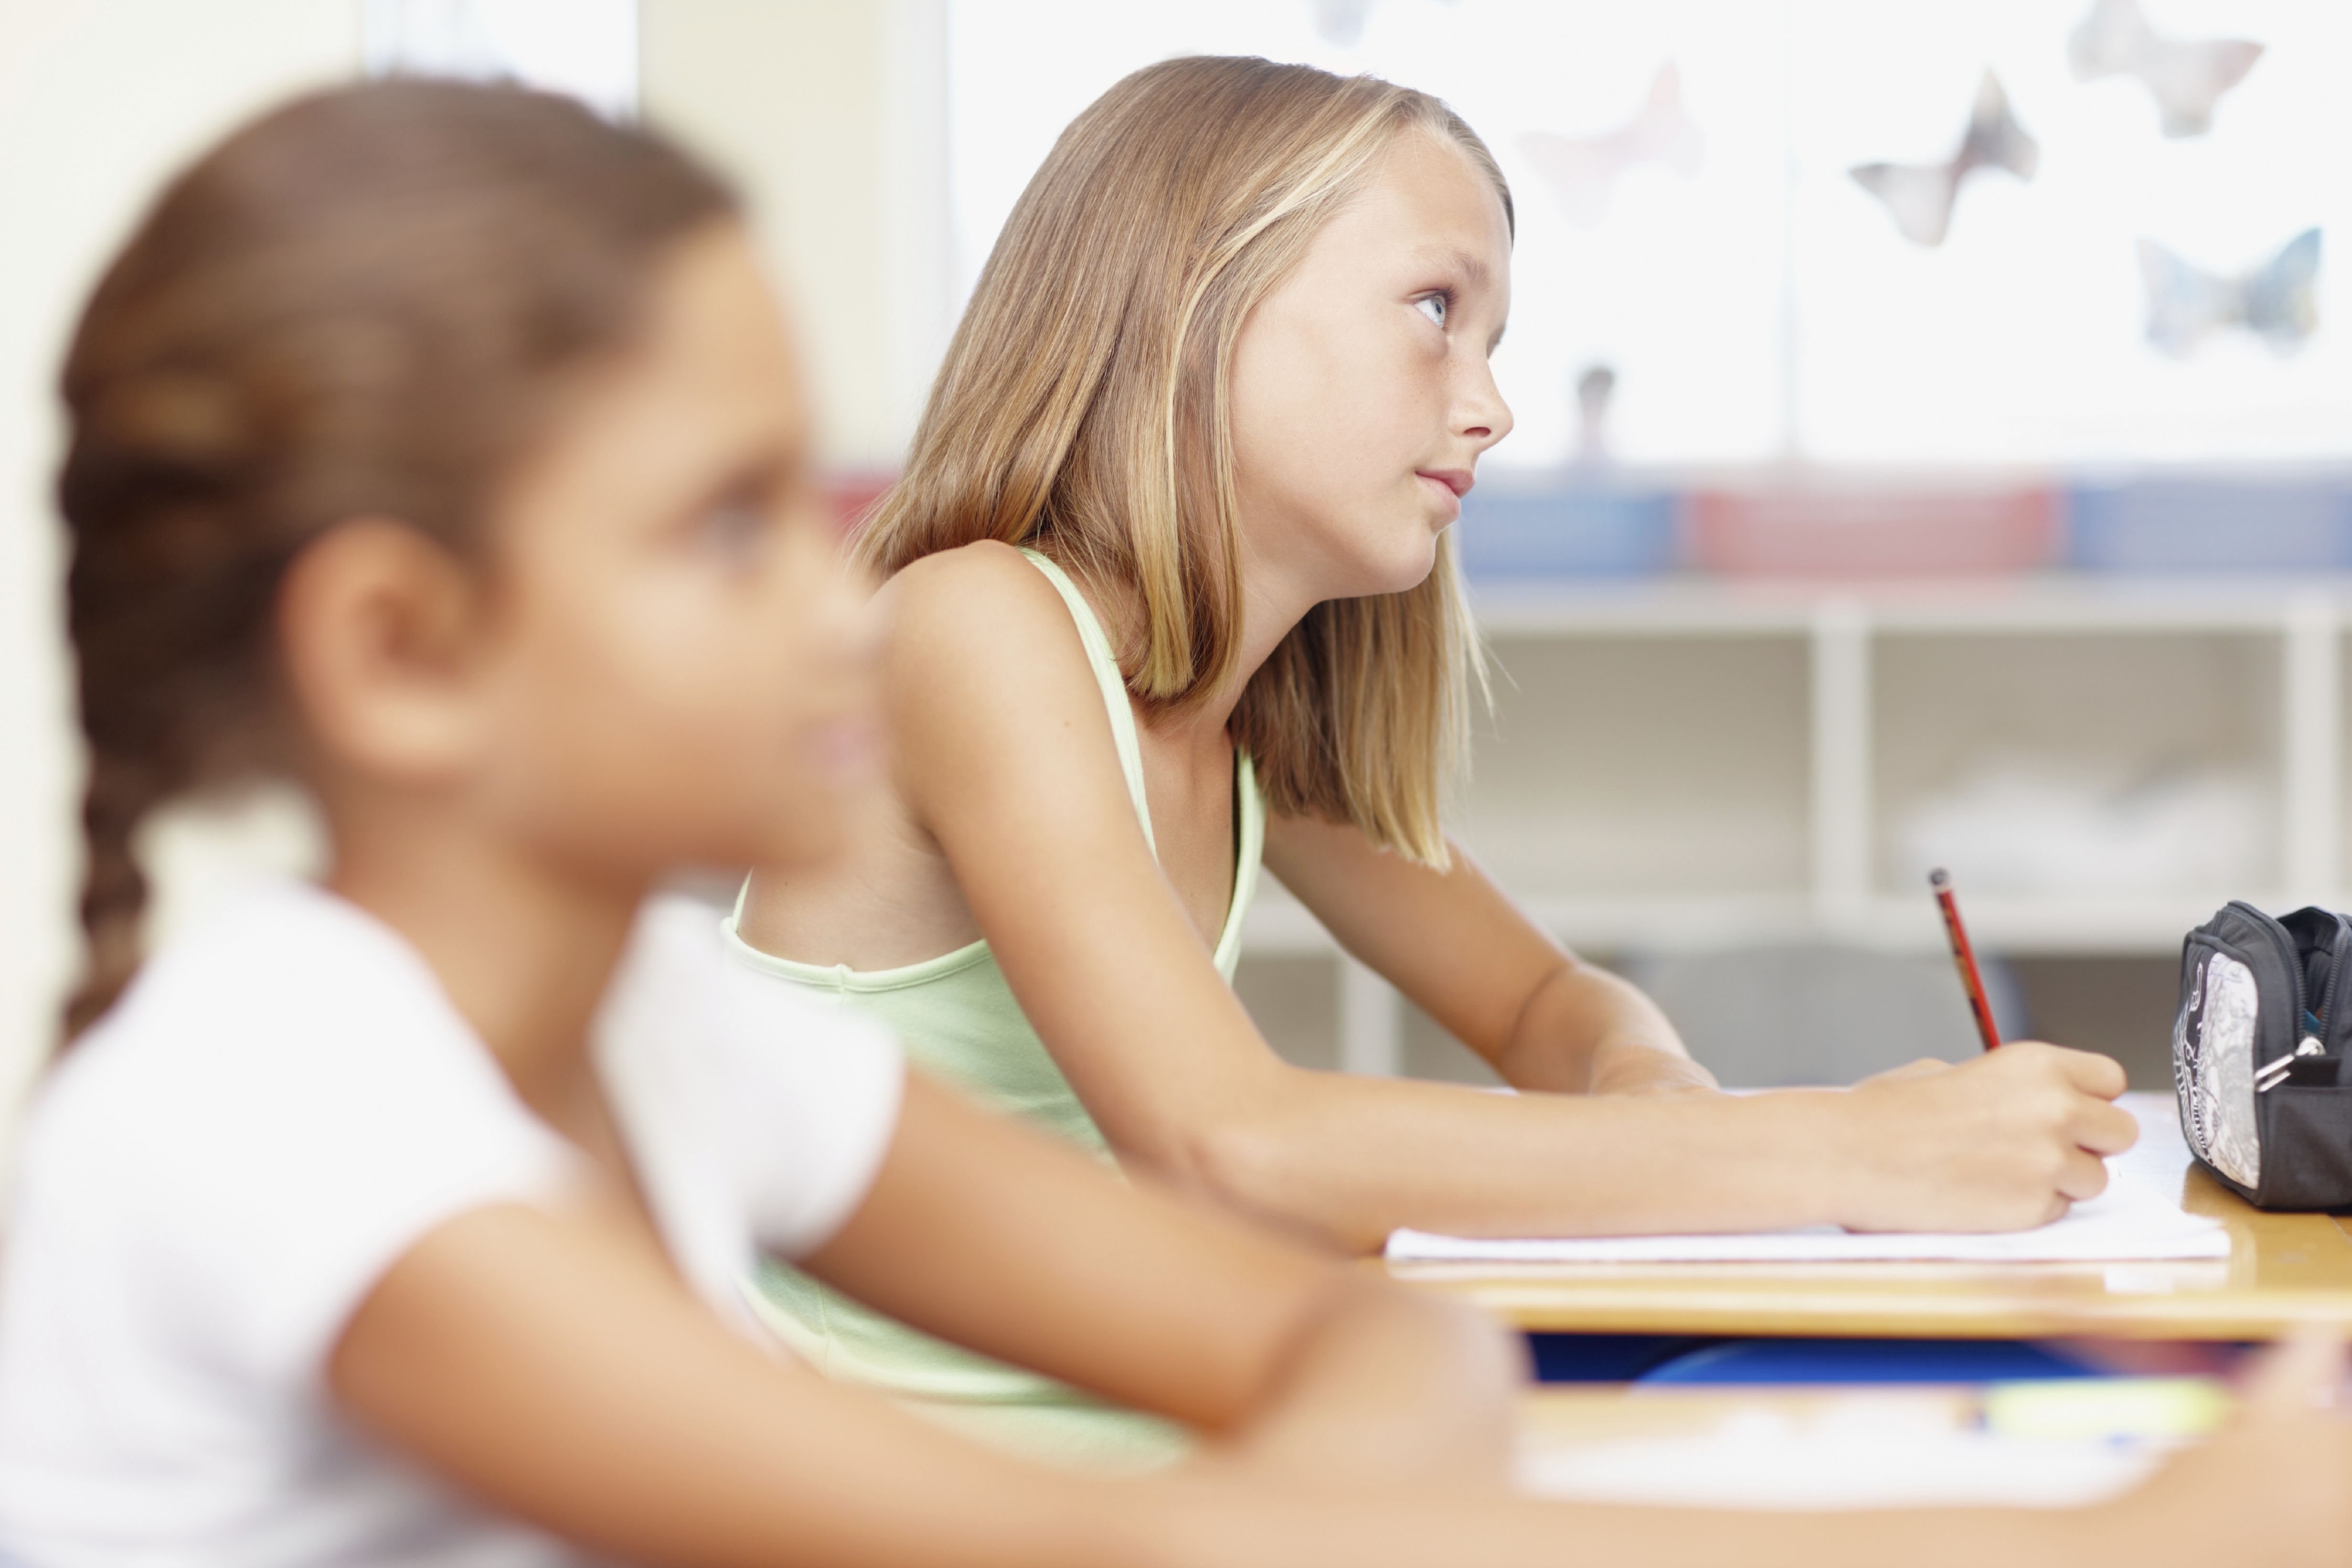 Does Your Child Have Complex Learning Needs? Here’s What To Look for in Her Classroom